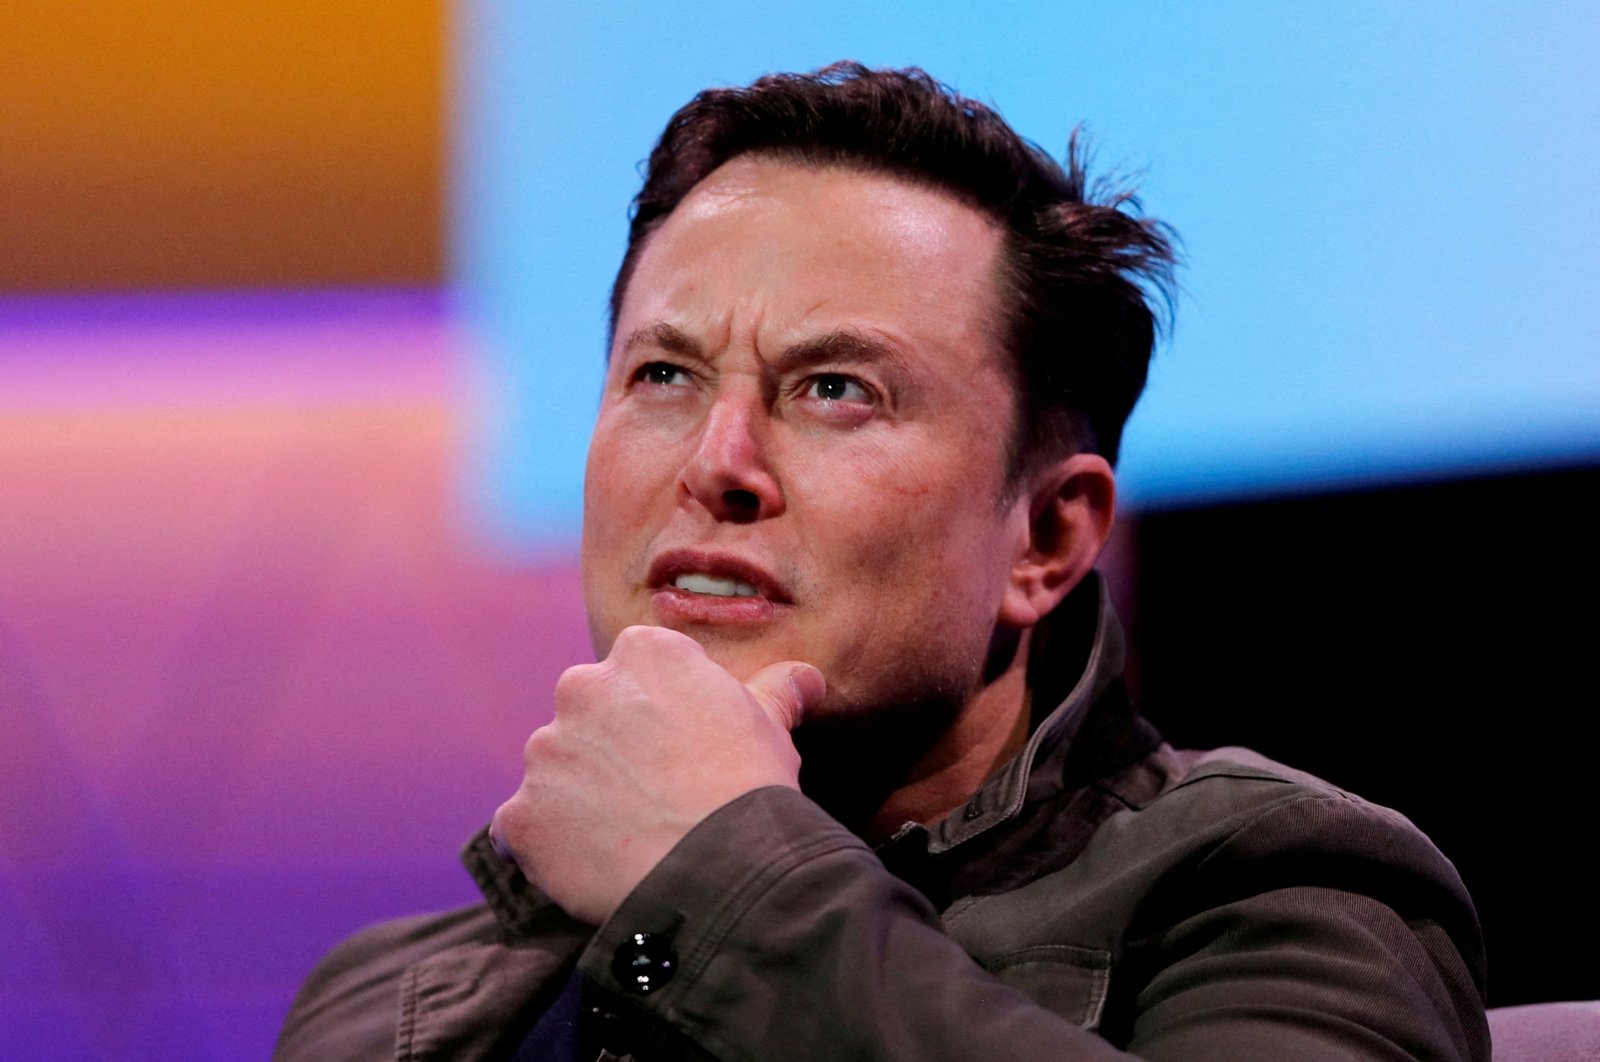 SpaceX owner and Tesla CEO Elon Musk at the E3 gaming convention in Los Angeles, California, U.S., June 13, 2019. (Reuters Photo)